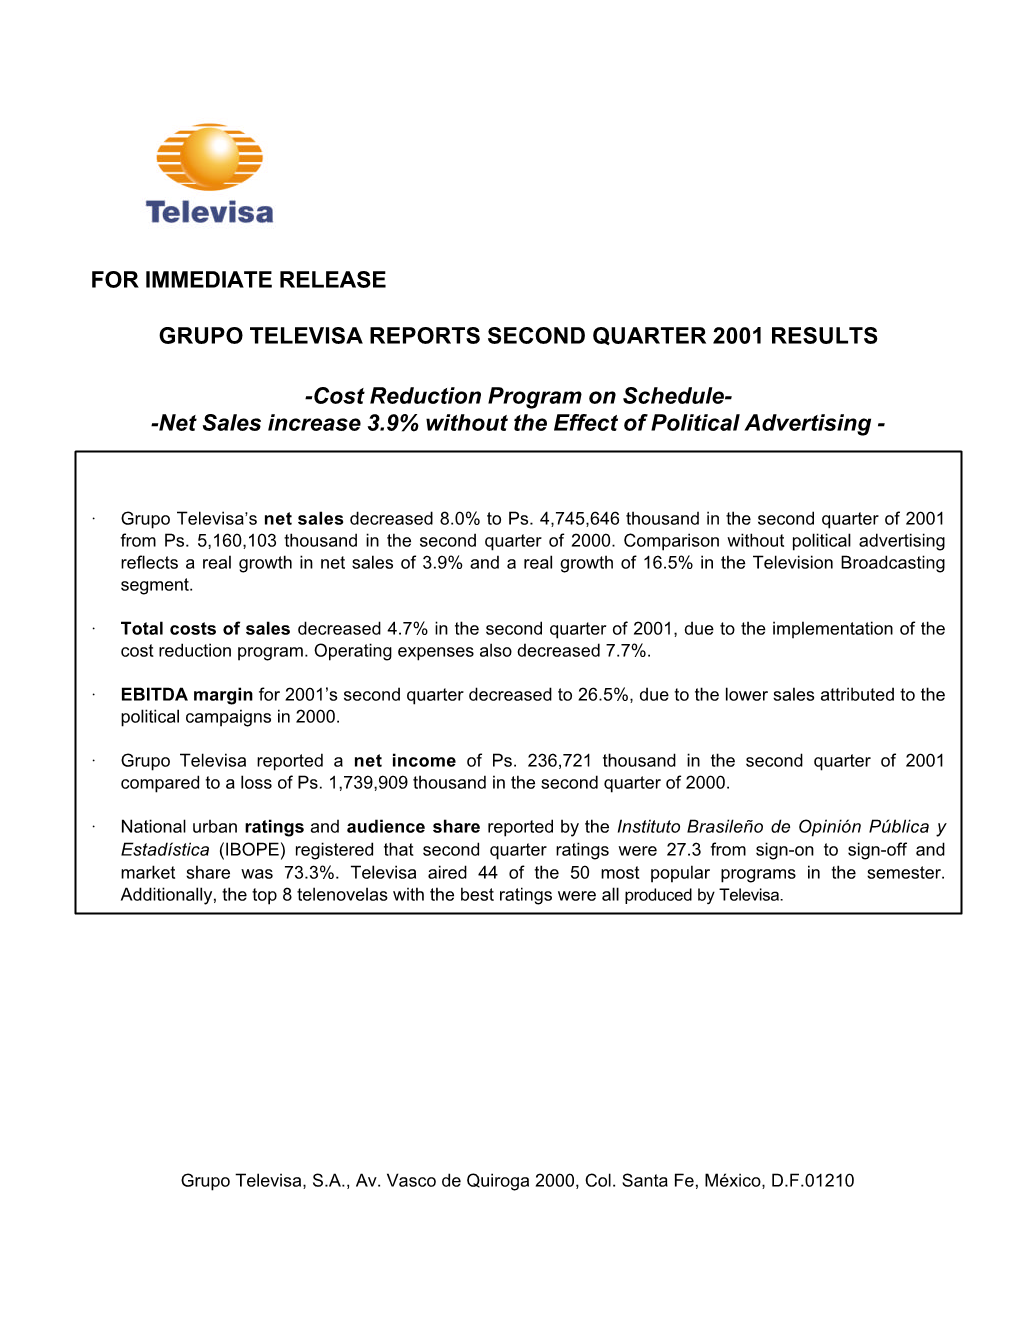 For Immediate Release Grupo Televisa Reports Second